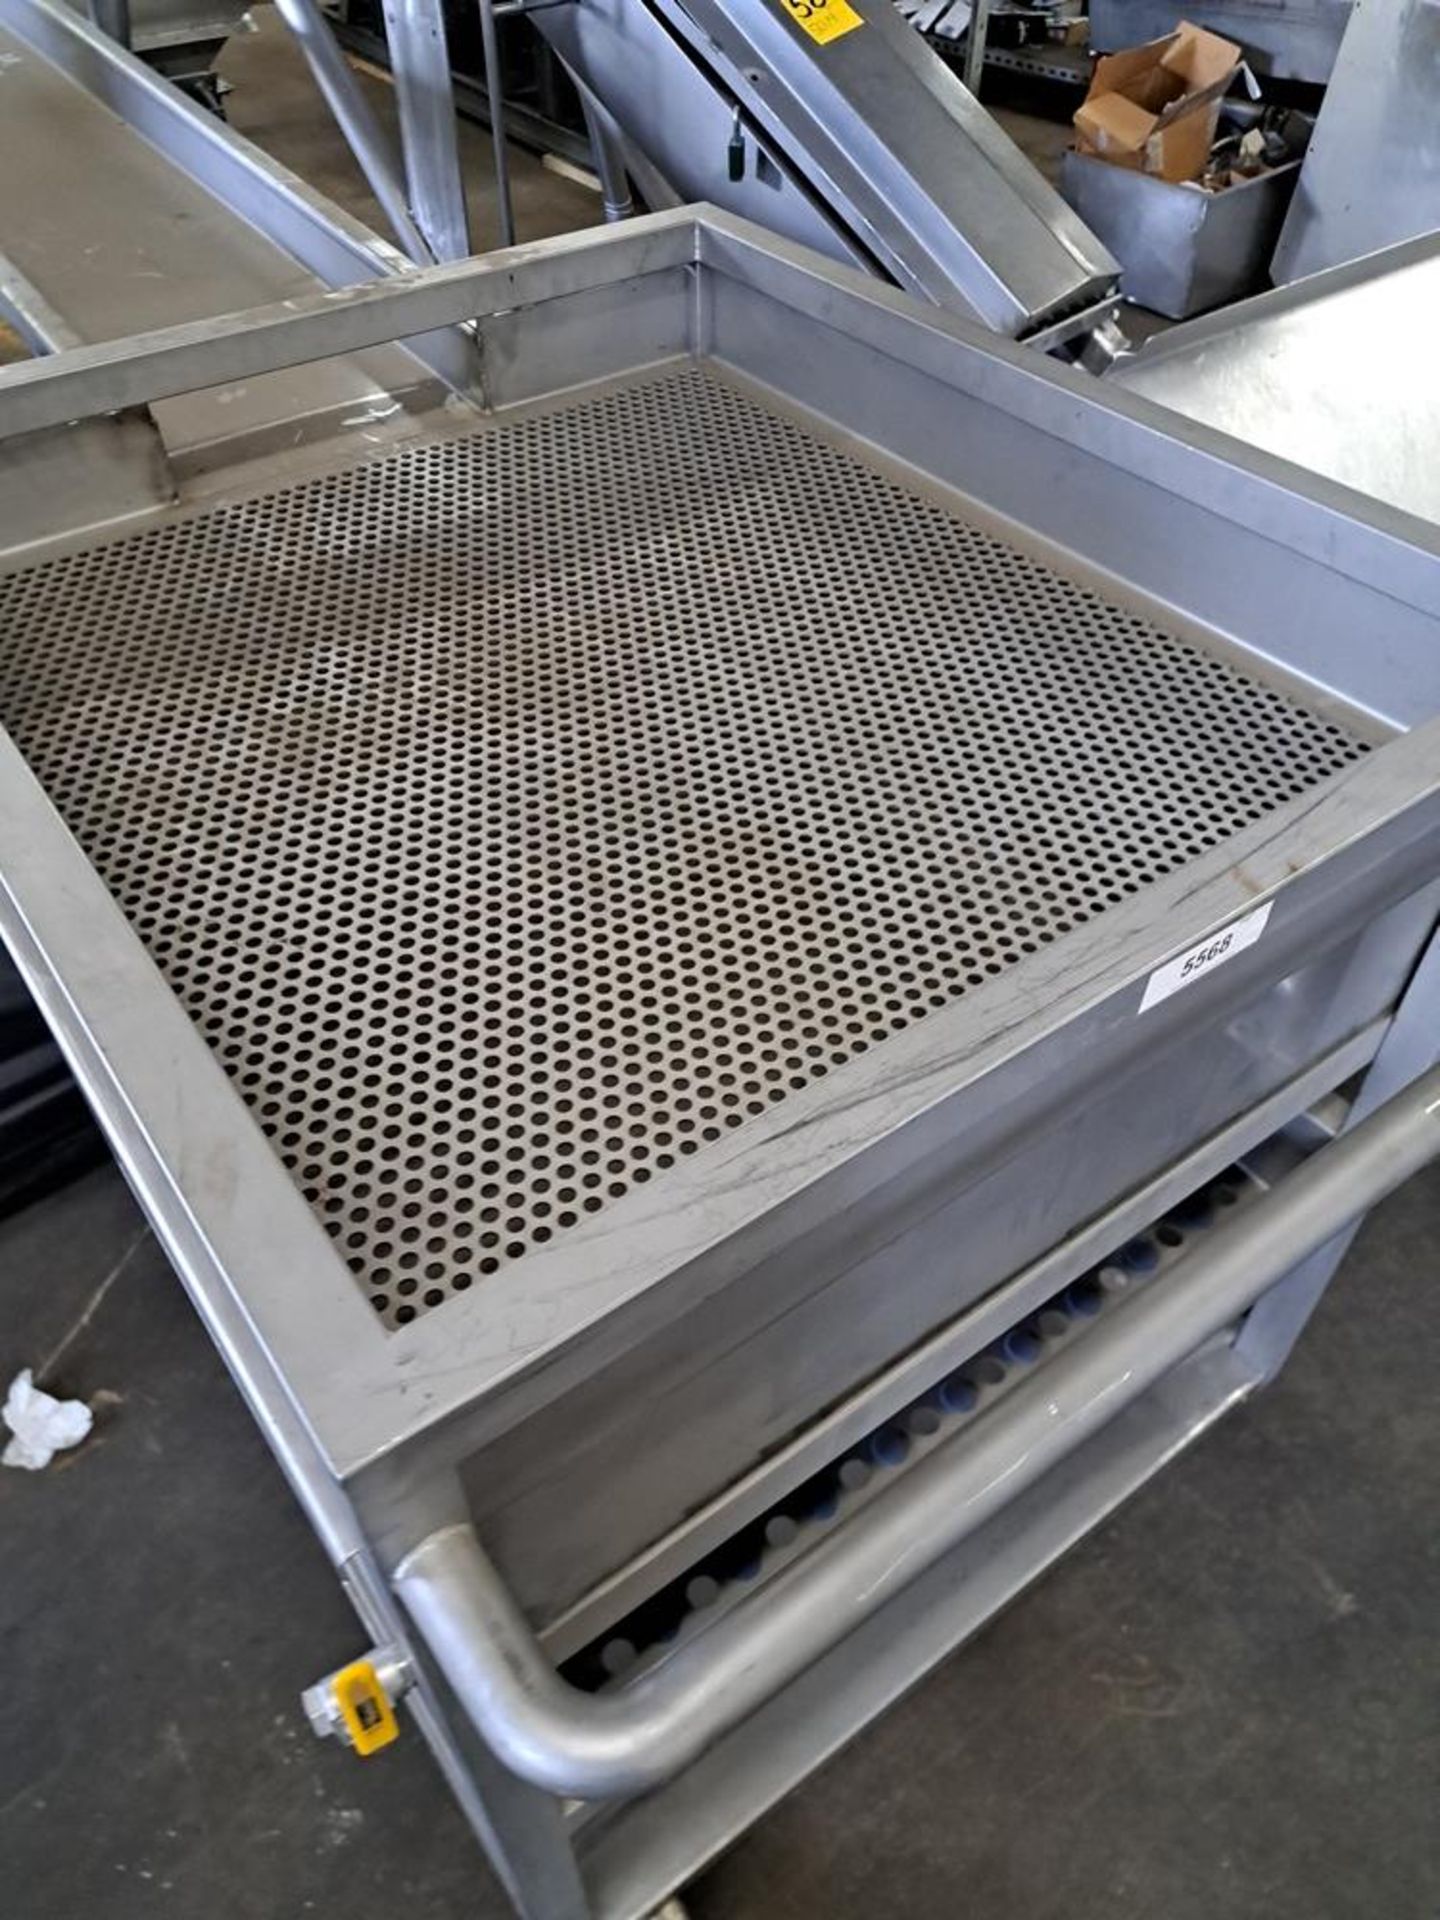 DeJong Portable Stainless Steel Product Sorting Trough, 31" wide X 36" long X 5" deep, perforated - Image 2 of 5